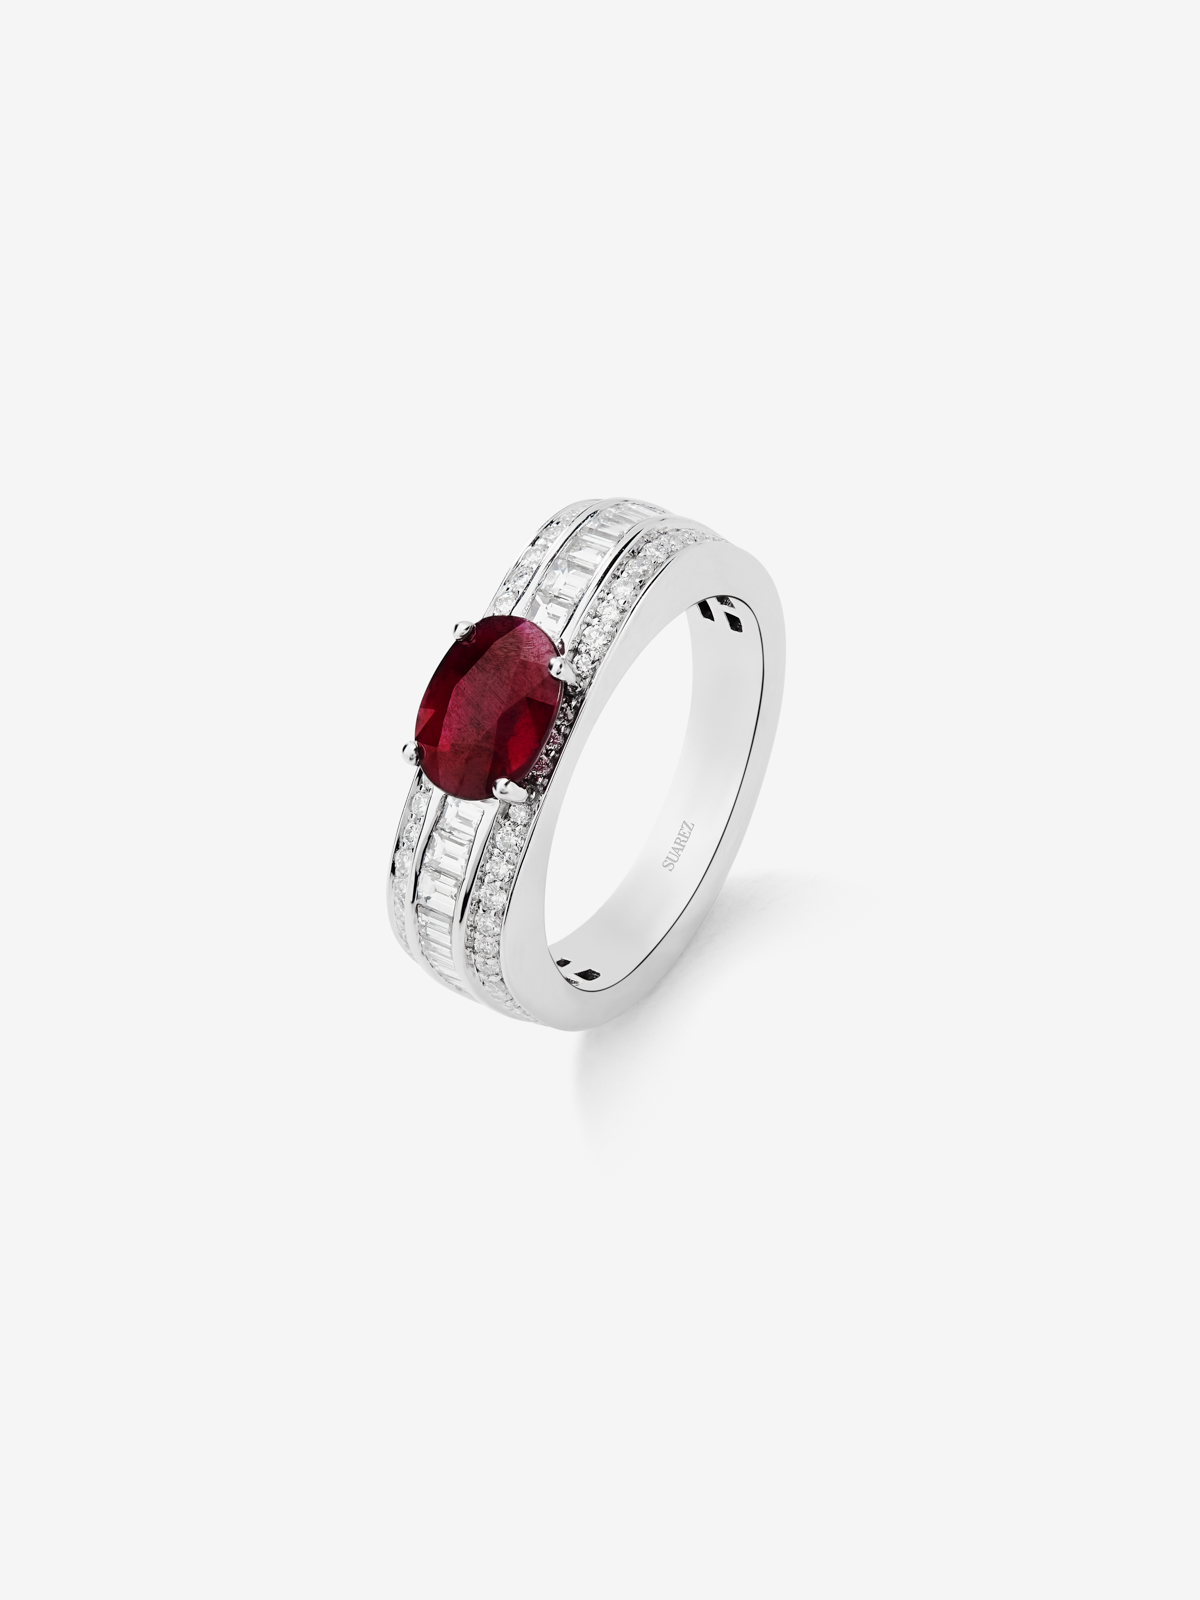 18K White Gold Ring with Red Pigeon Blod Rub